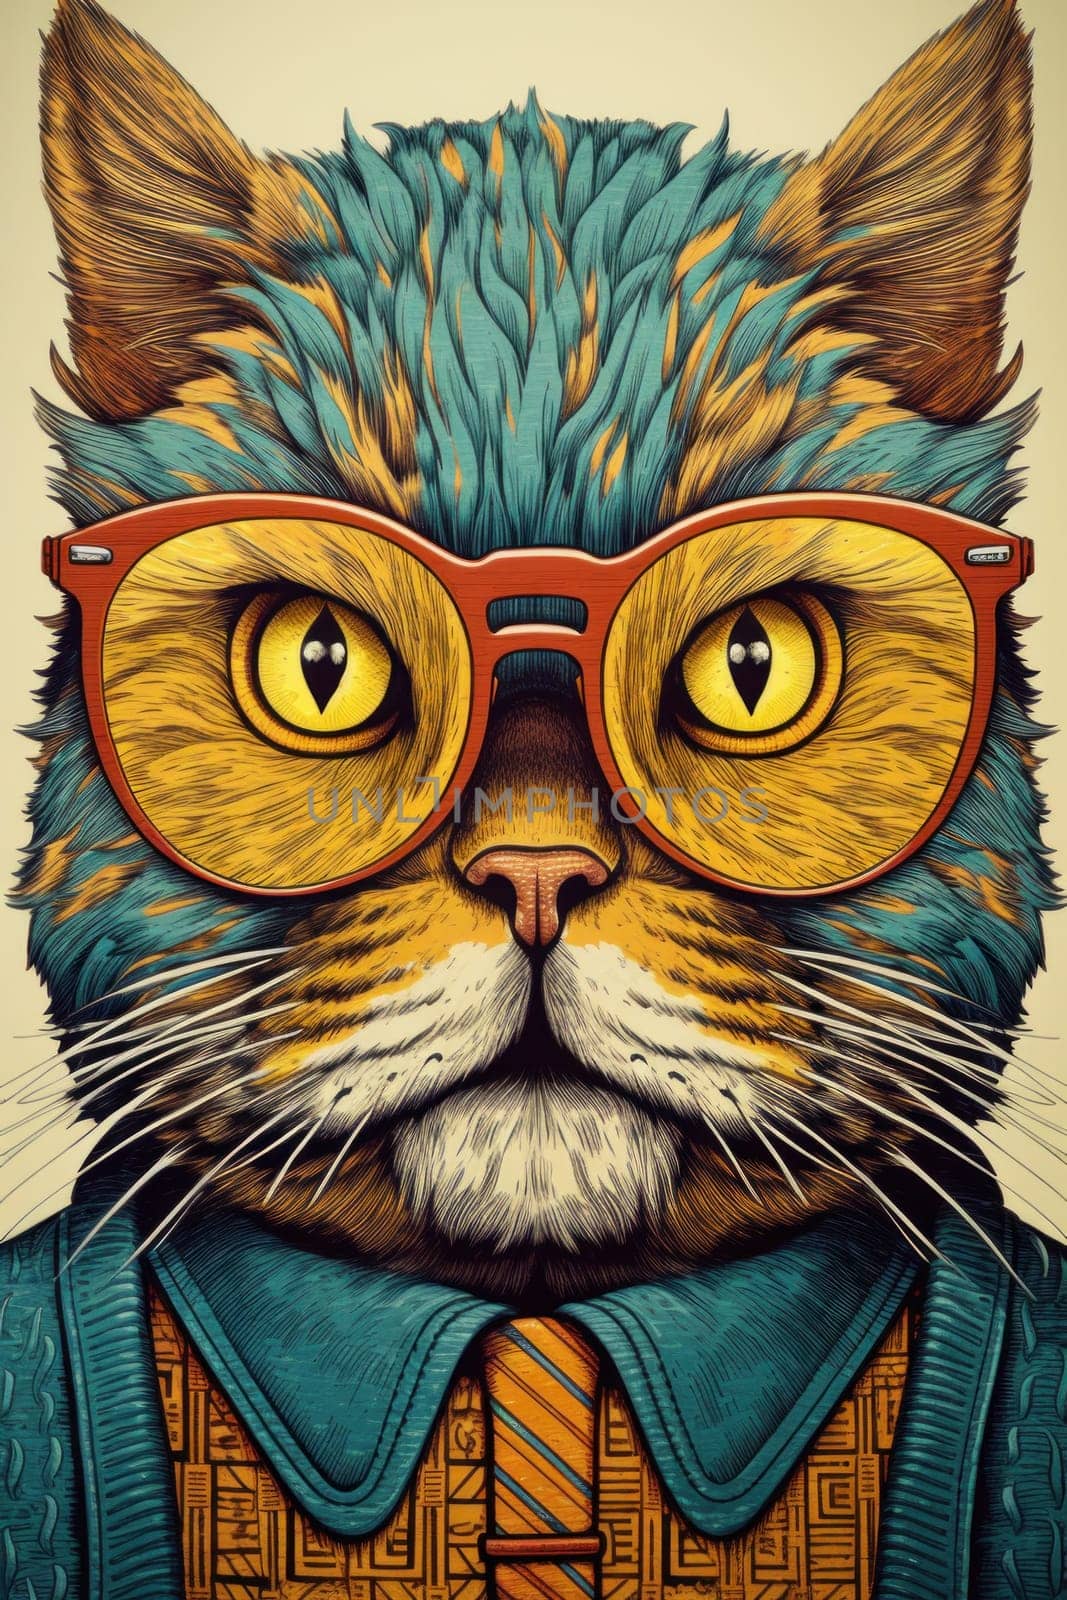 A cat wearing glasses and a tie, AI by starush